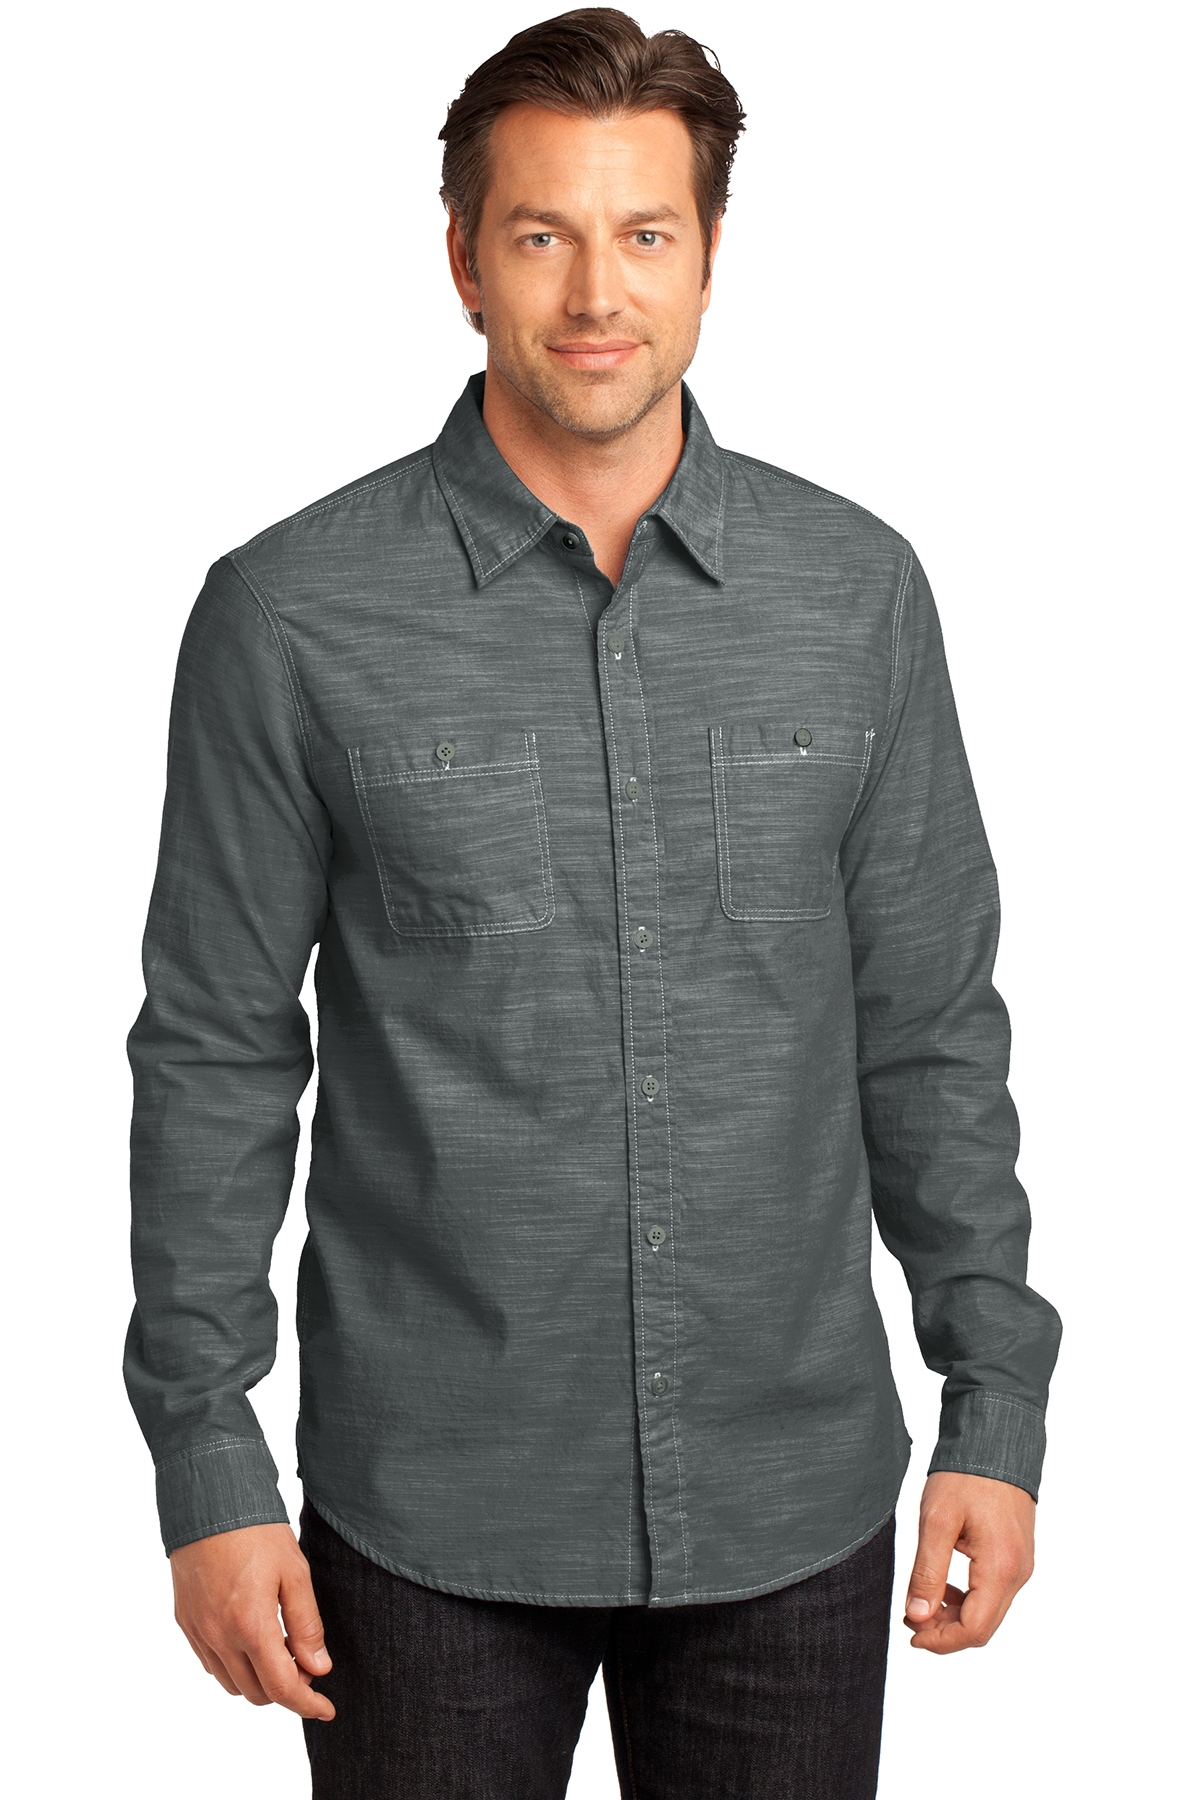 District Made - Mens Long Sleeve Washed Woven Shirt. DM3800 - Men's ...